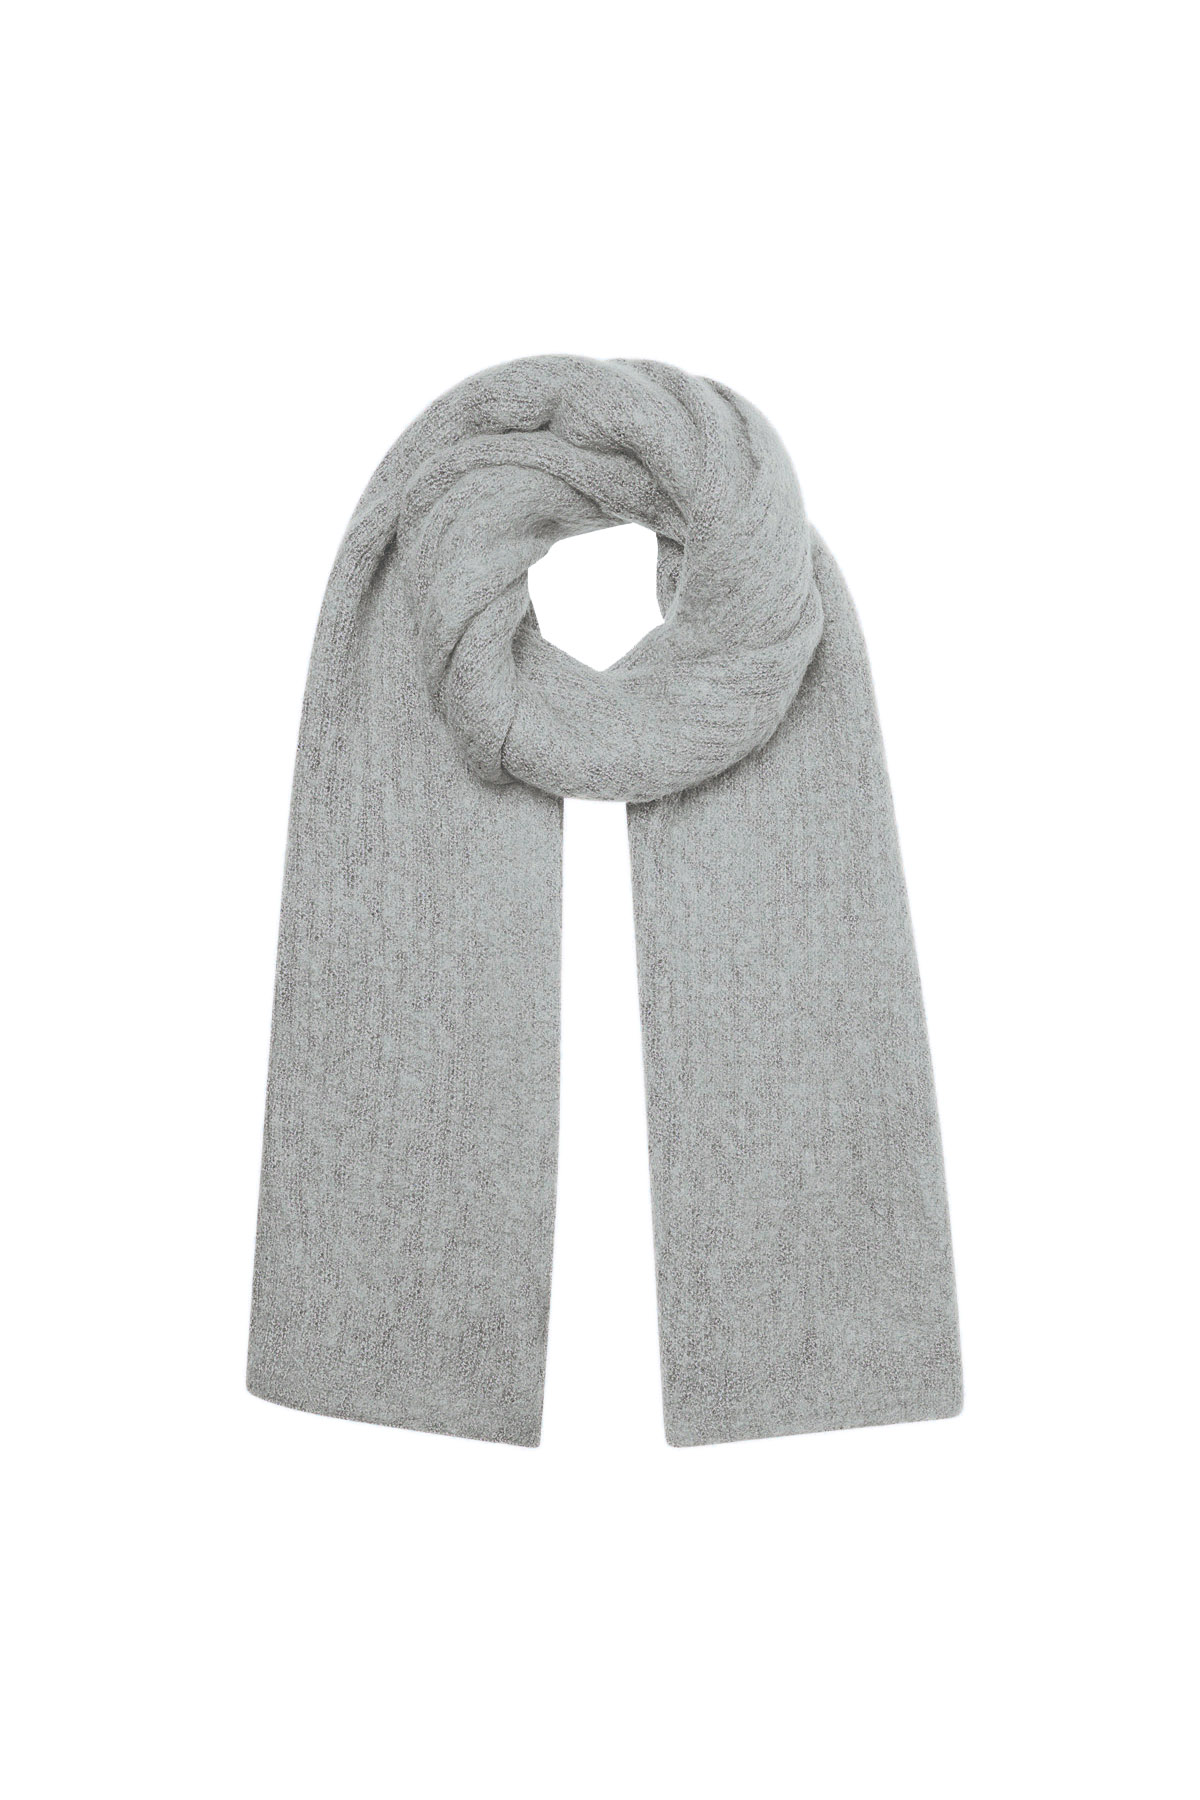 Scarf knitted plain - grey h5 